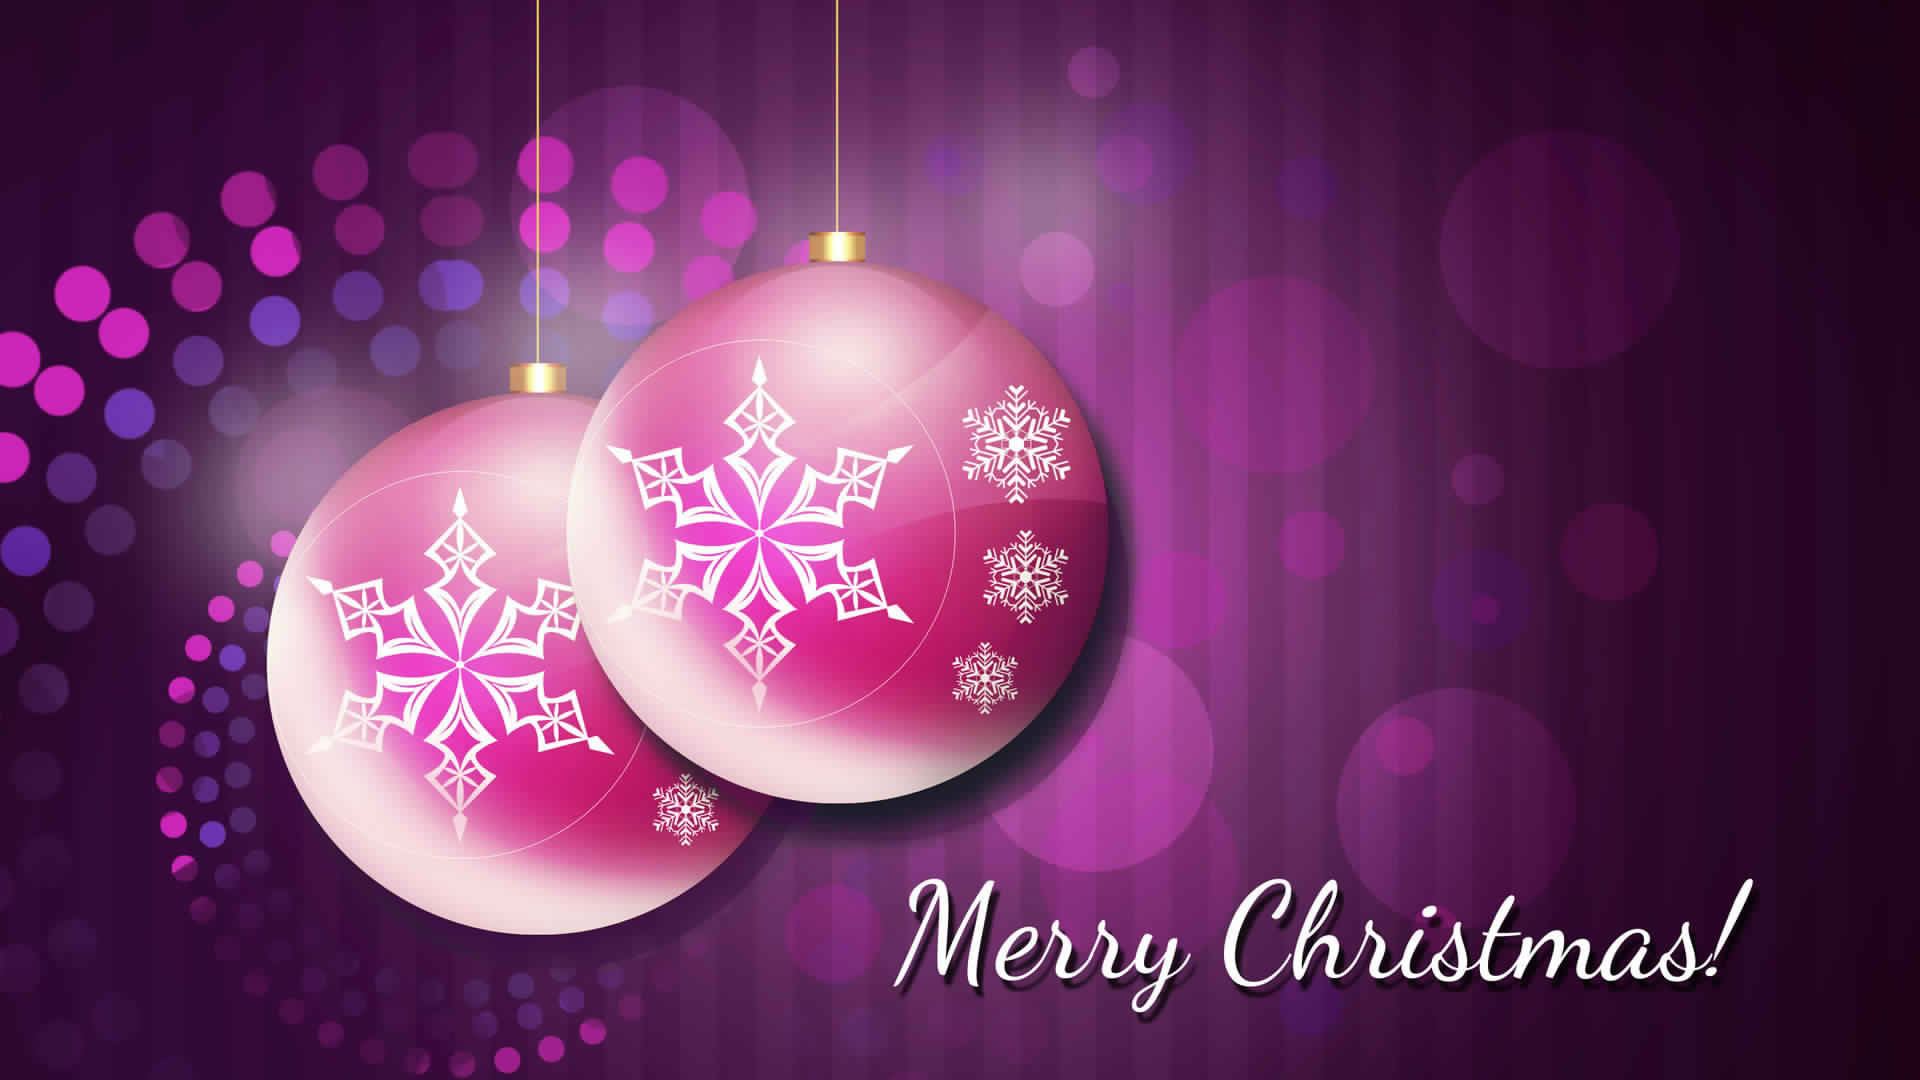 Free Christmas Wallpaper Backgrounds